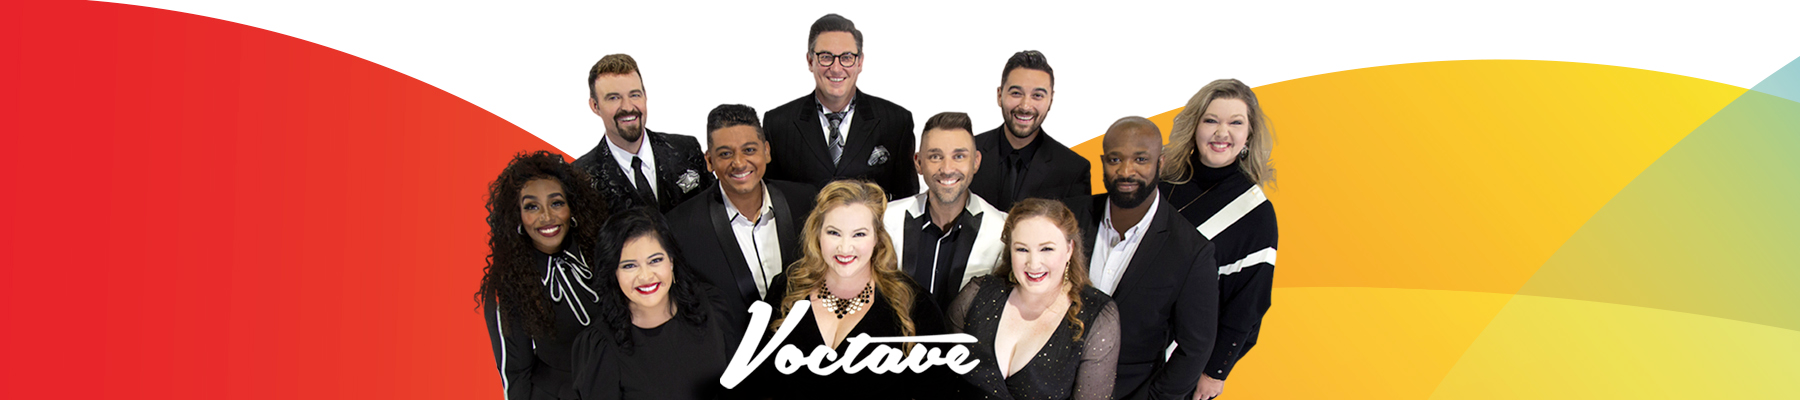 Voctave header featuring a group photo of the Voctave members